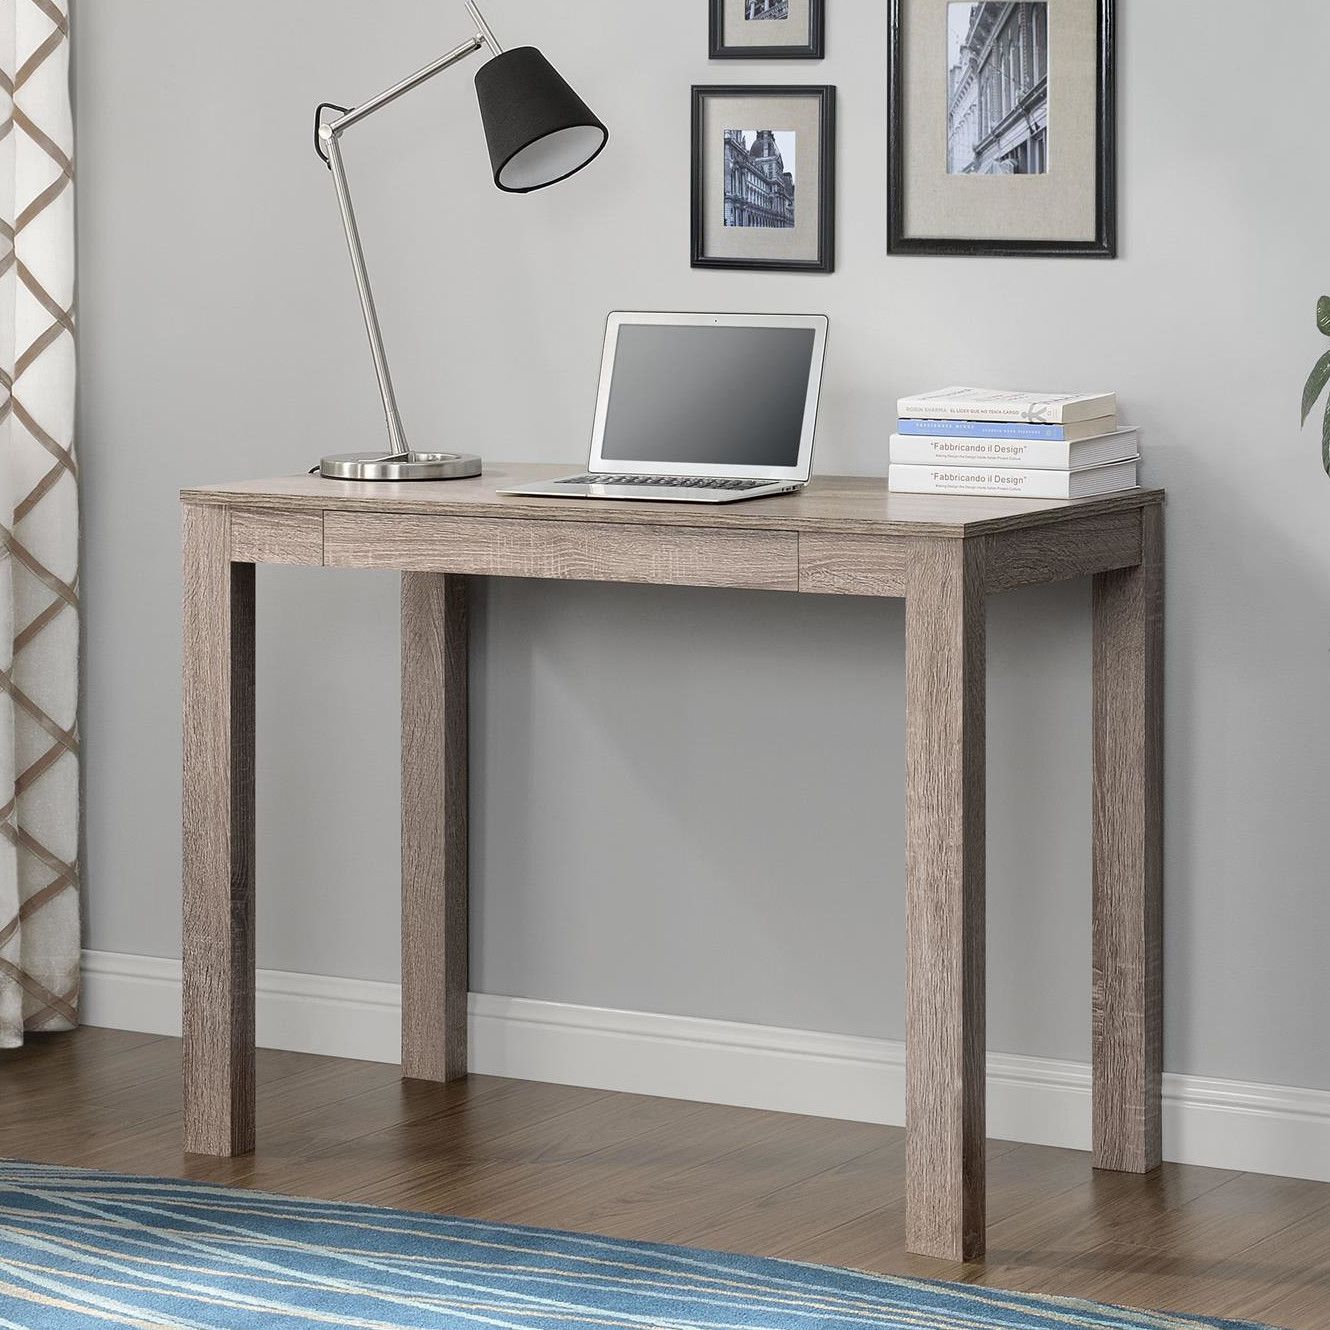 Altra Furniture Parsons Writing Desk With Drawer | Writing Desk With In Sonoma Oak 2 Tone Writing Desks (View 4 of 15)